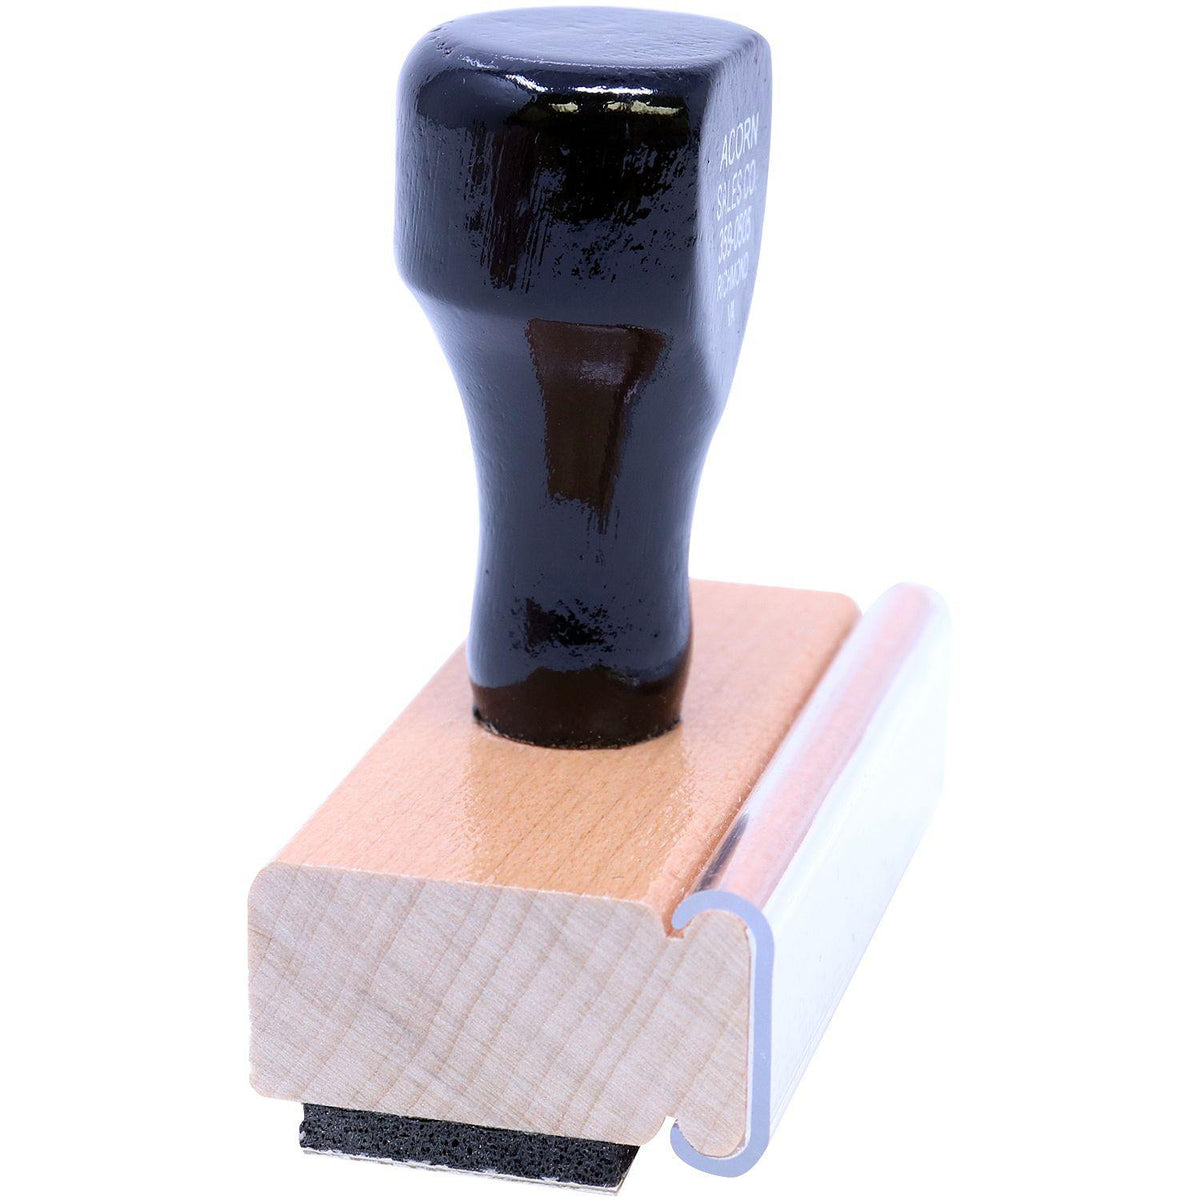 Side View of Large Formas Rubber Stamp at an Angle